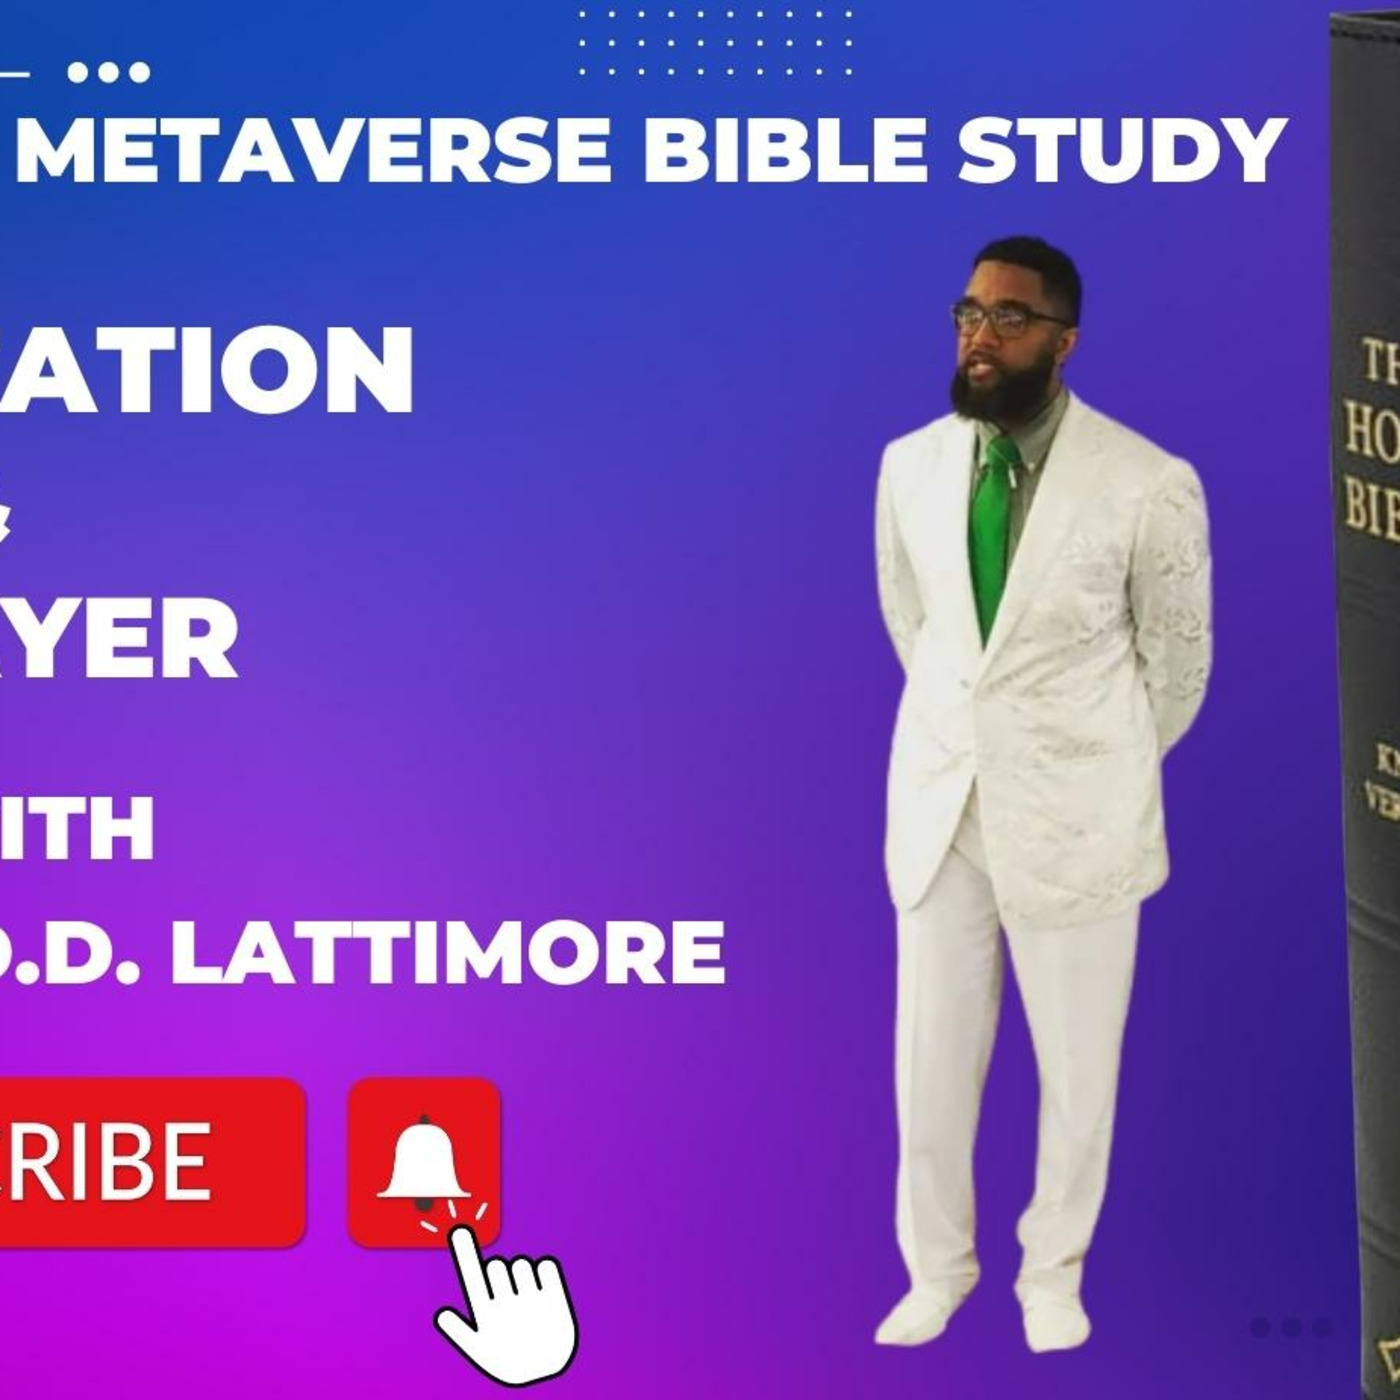 Metaverse Bible Study On YouTube (Podcast)